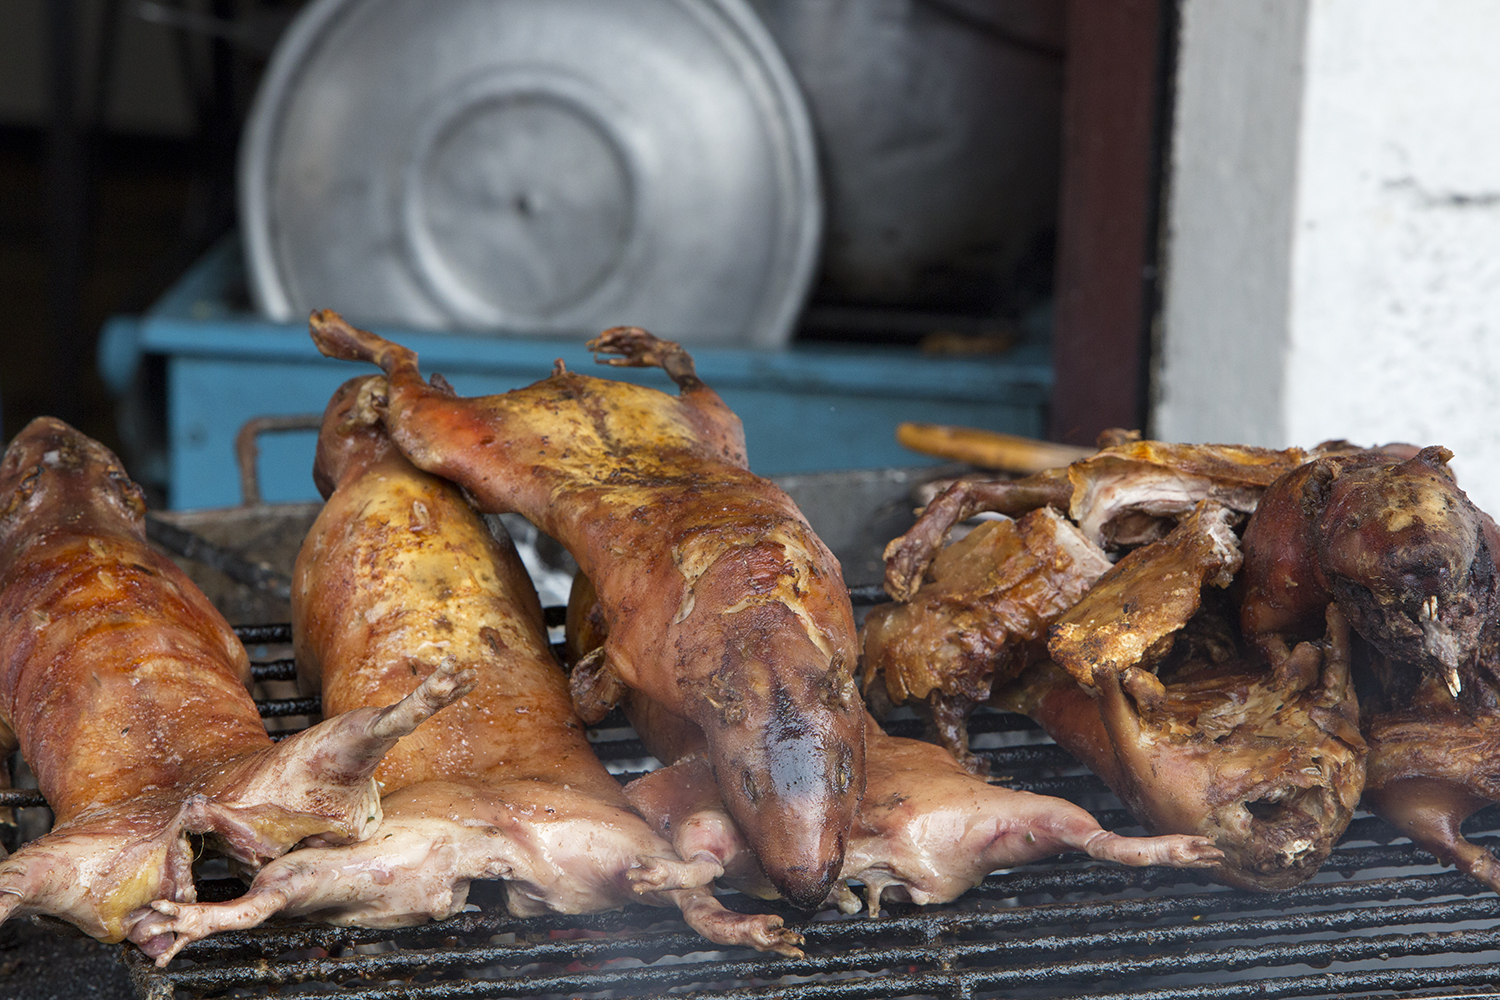 Cooked cuy (guinea pig) in Banos © Piccaya / Getty Images